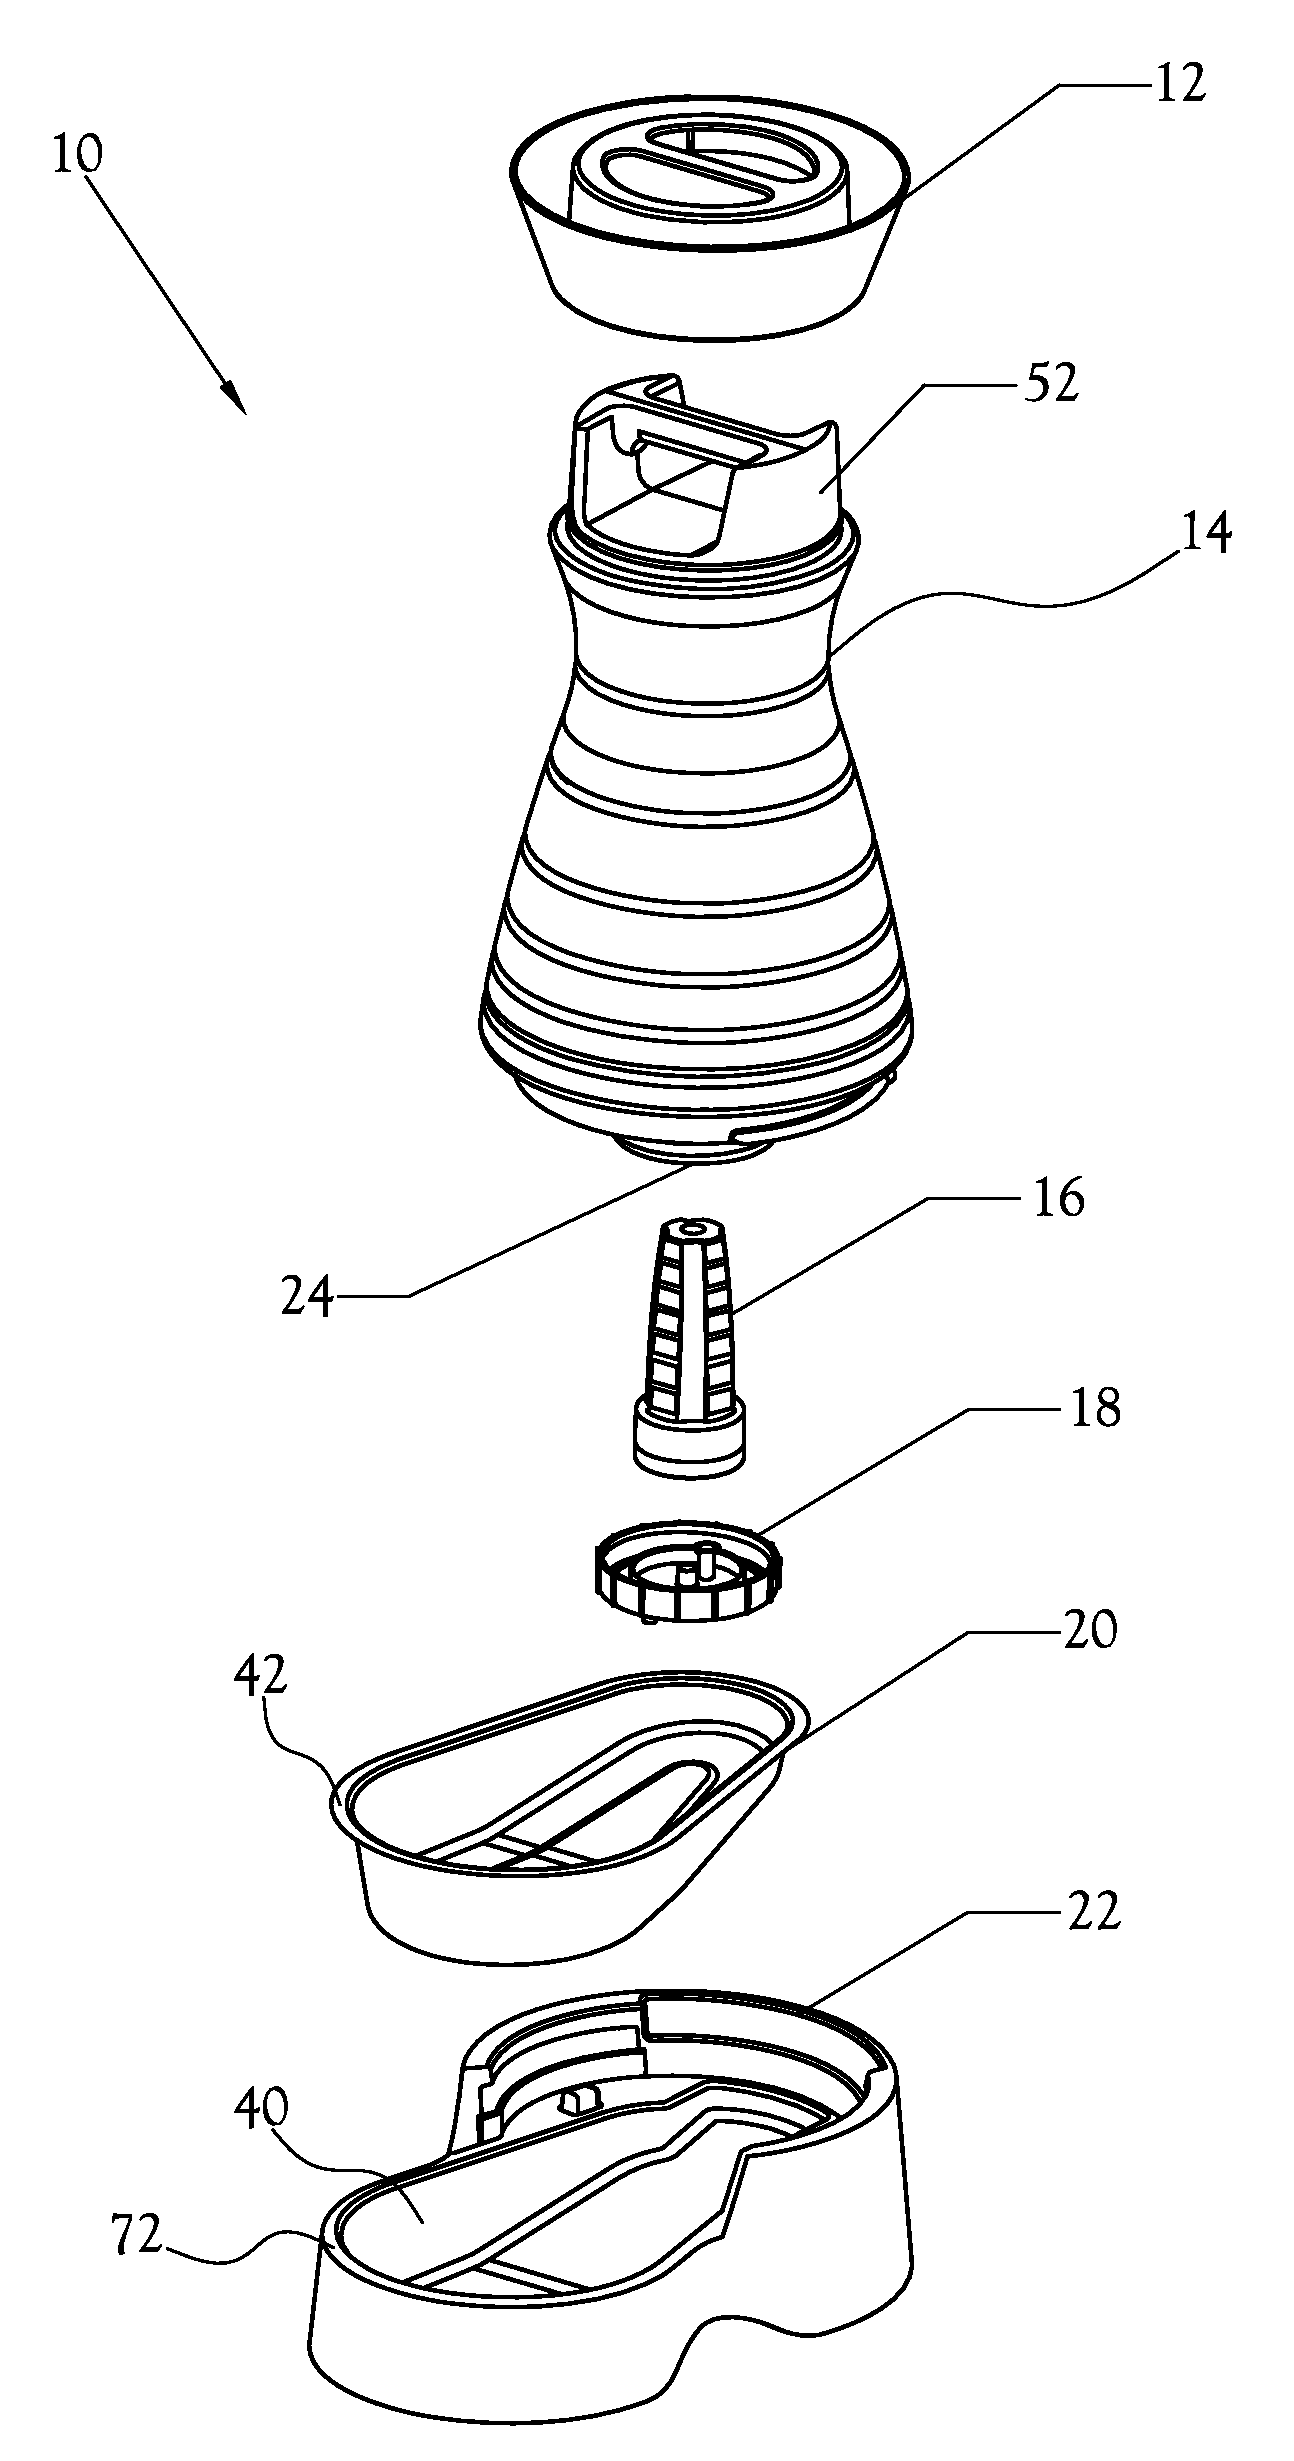 Gravity-Induced Automatic Animal Watering/Feeding Device